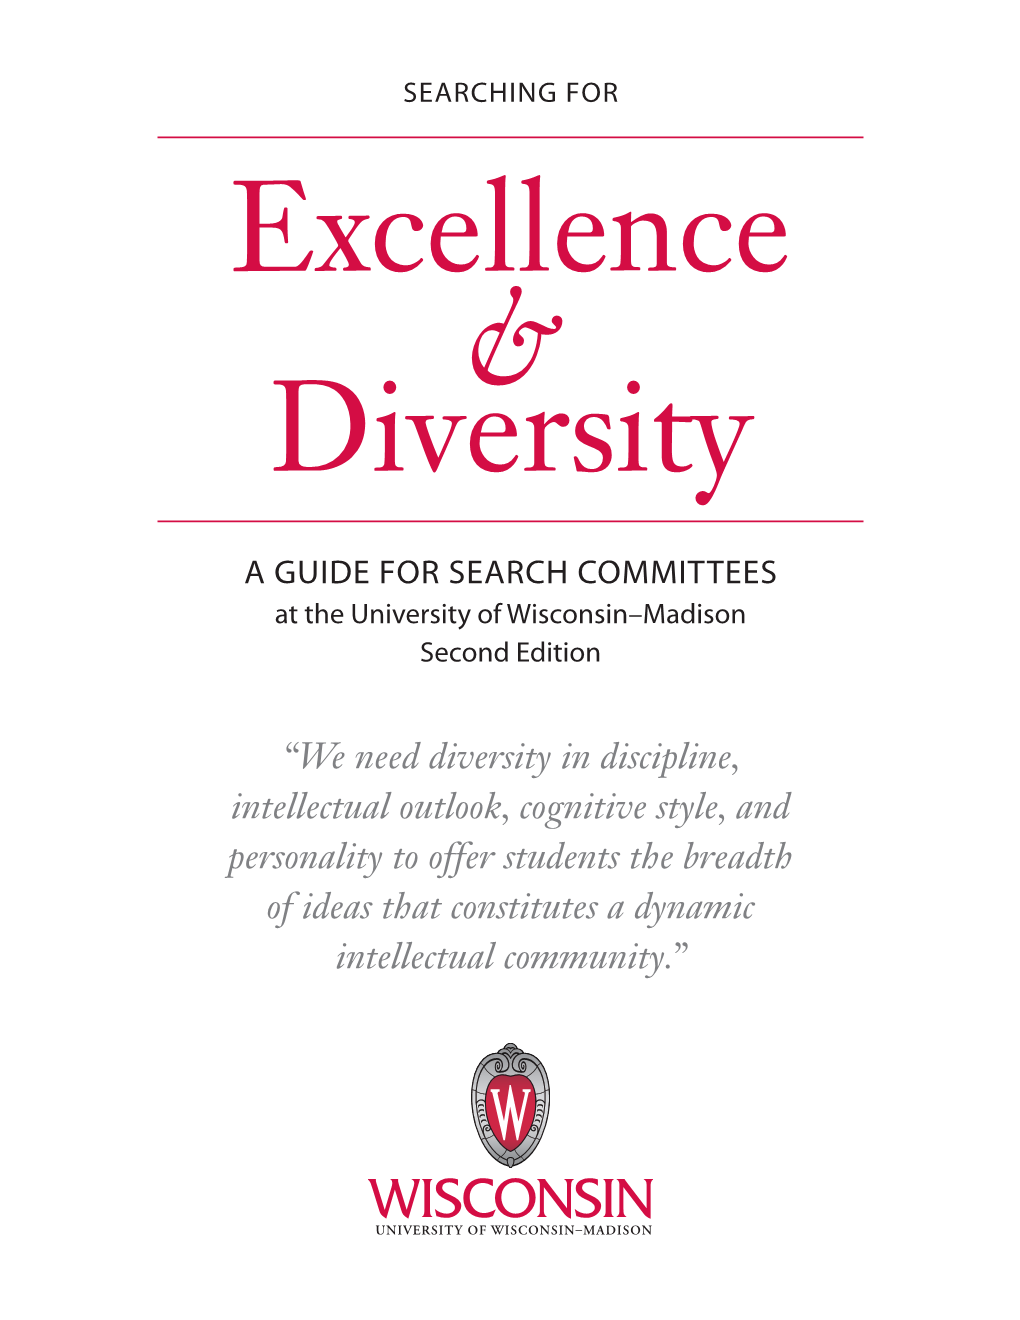 Searching for Excellence and Diversity: a Guide for Search Committee Chairs